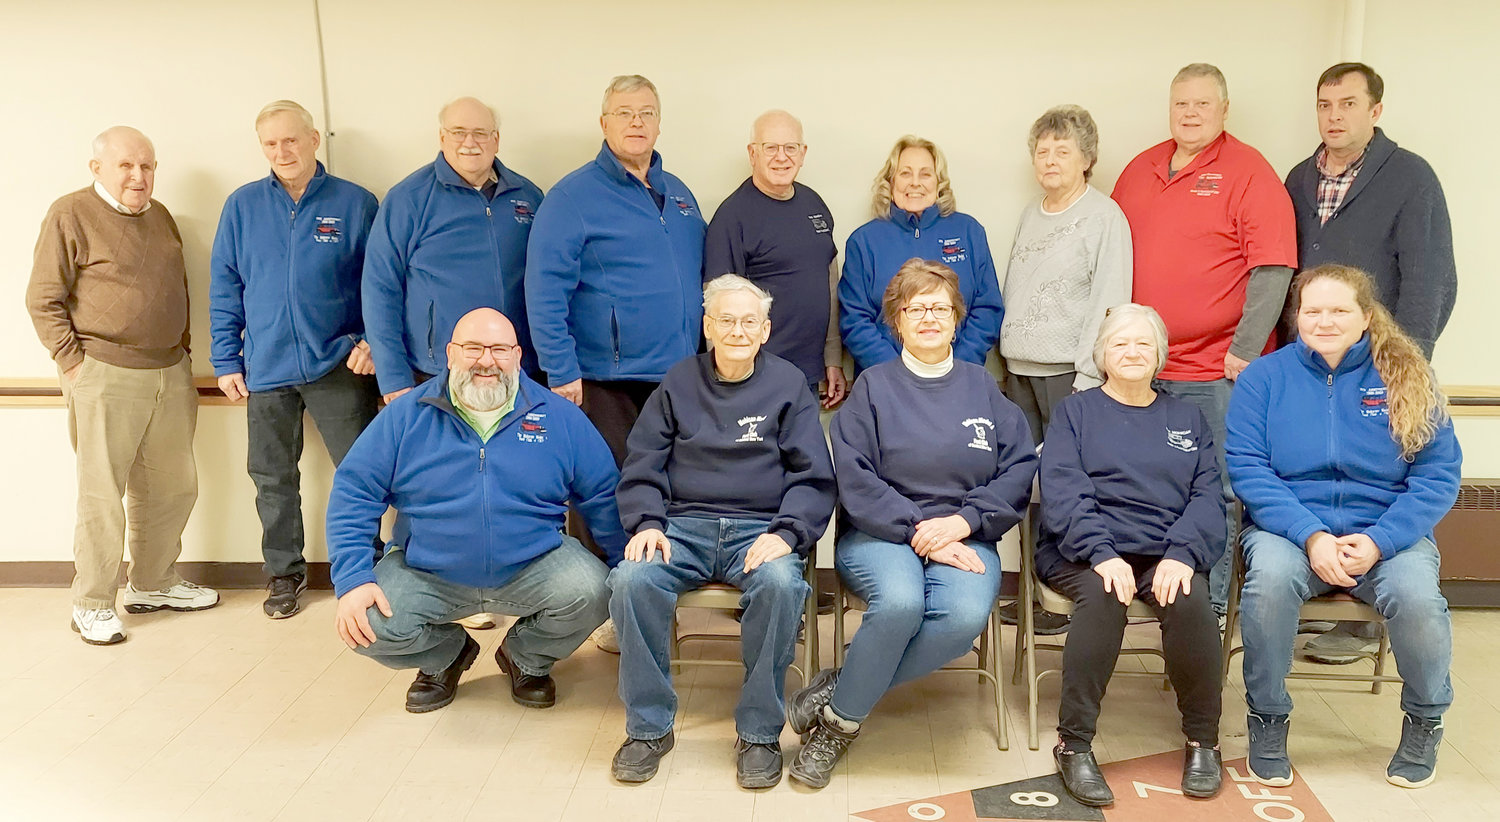 The Mohican Model A Ford Club Officers and Board of Directors for 2023 meet monthly at St. Paul's Methodist Church in Oneida. President Kim Caruso, Vice President Joe Van Slyke, Secretary Mabel Silliman, Treasurer Sal Caruso, Web Master Mike Silliman and the Board of Directors serving one and two year terms.  Visit https://mohicanmodela.weebly.com/ for more information on membership, history, club events and activities.